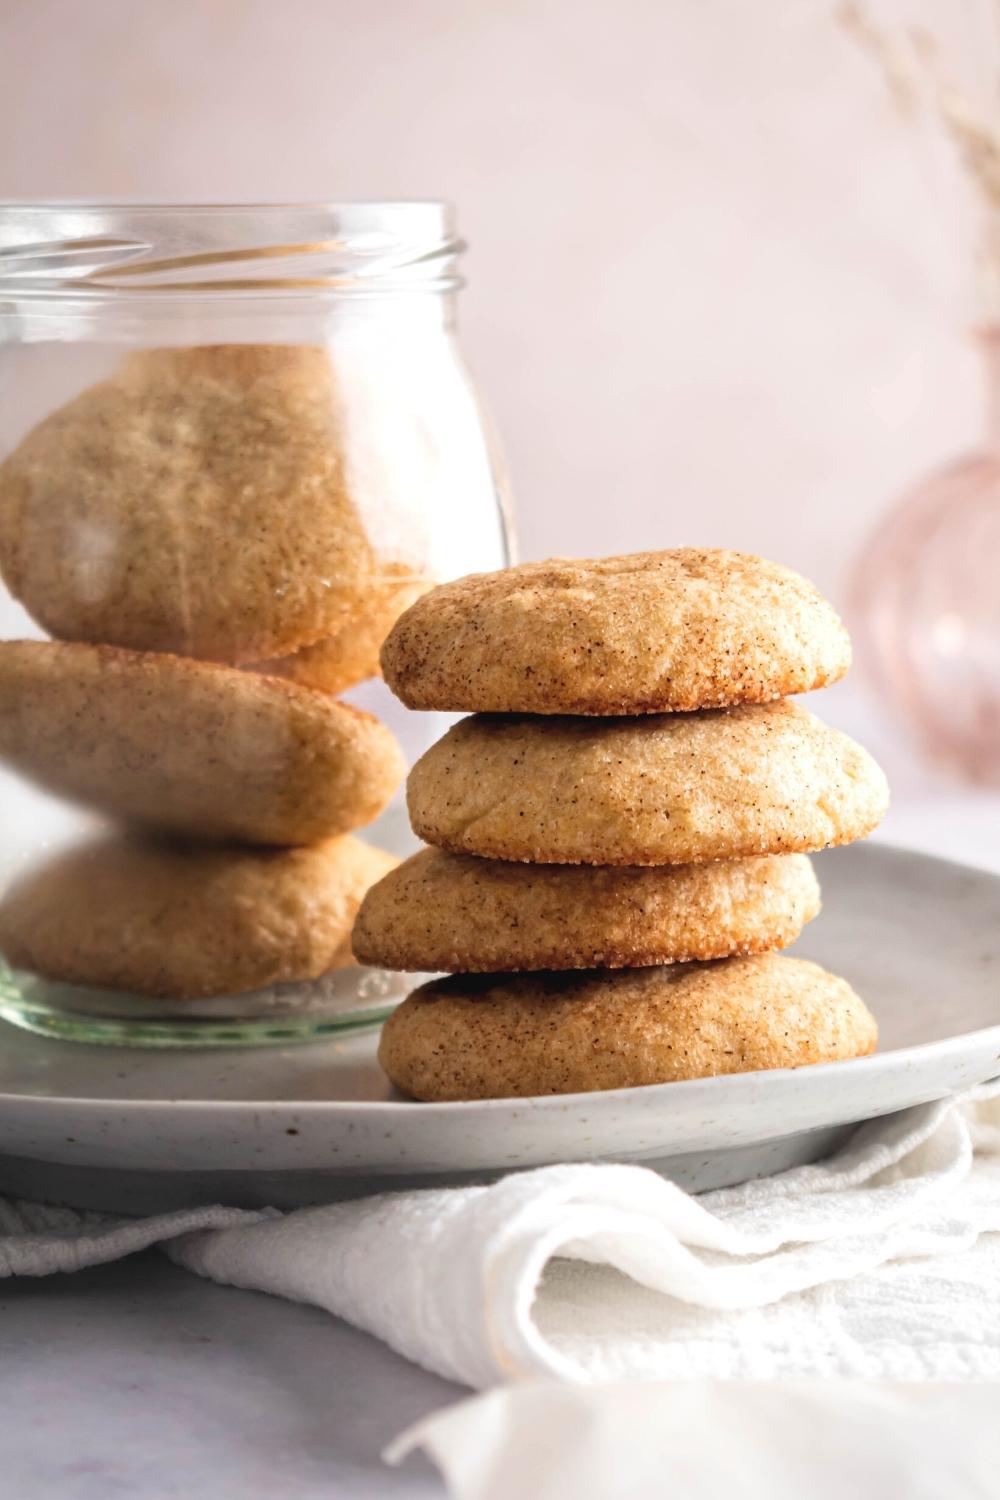 A stack of four snickerdoodle cookies on a white plate. Next to the stack as a jar filled with snickerdoodle cookies.